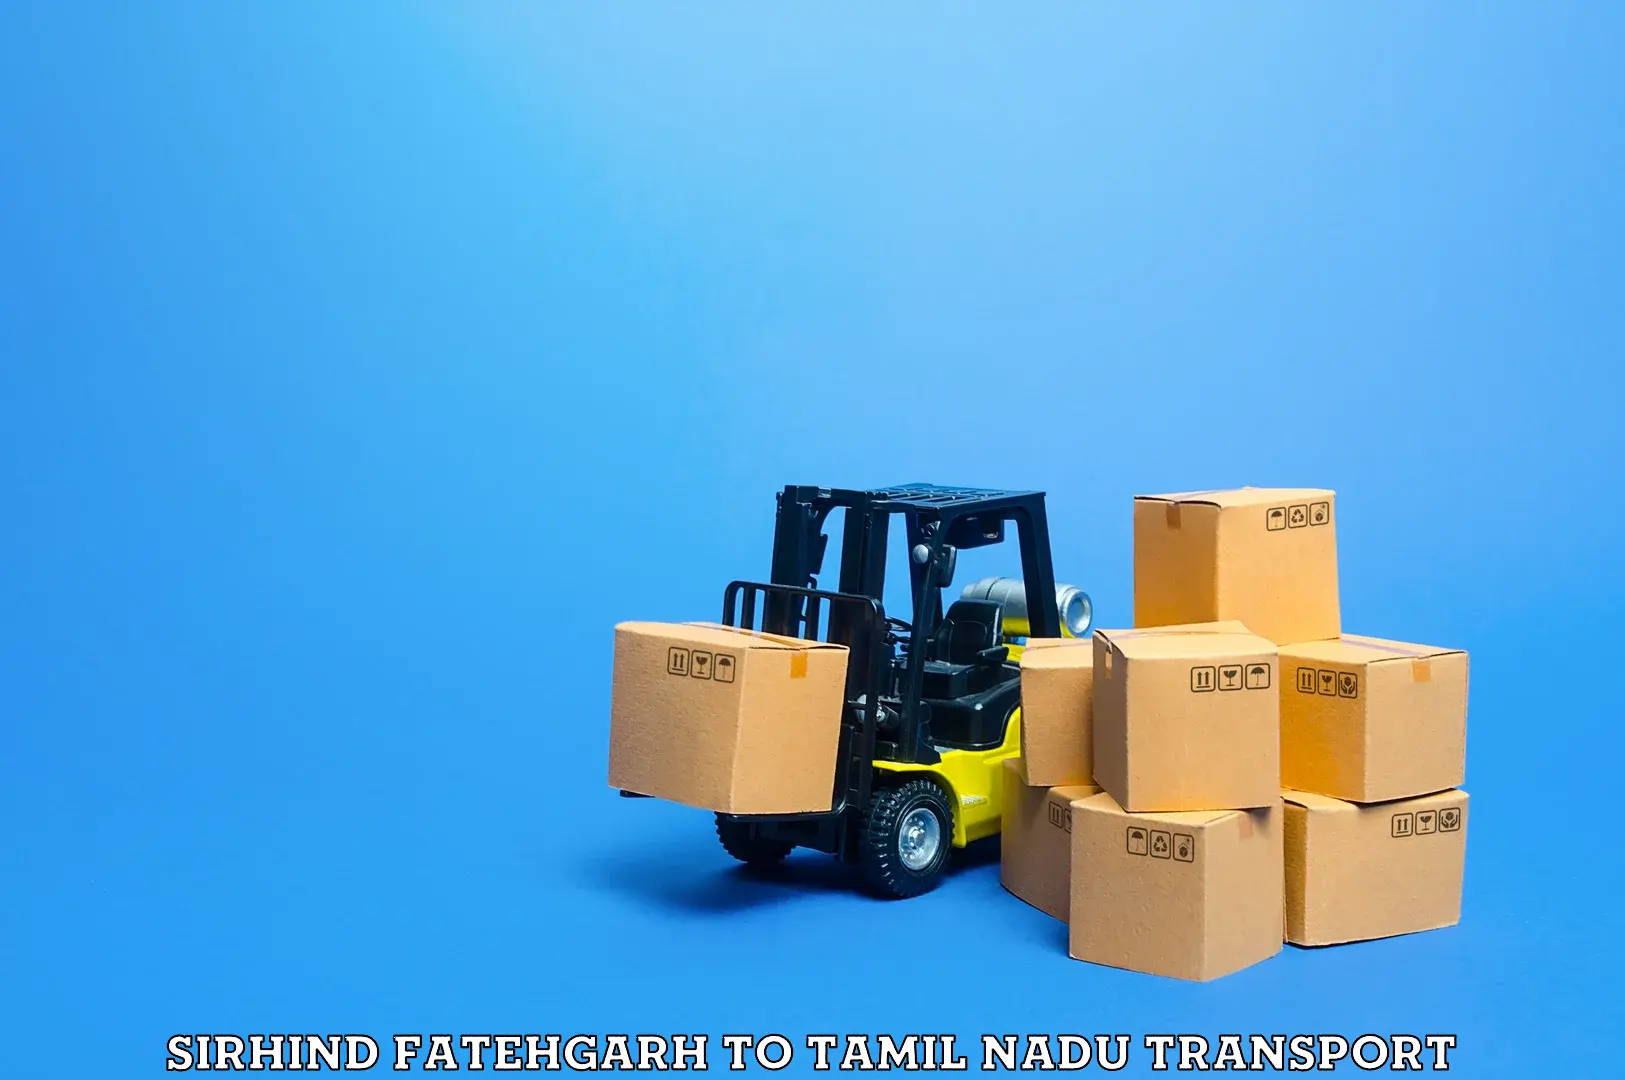 Package delivery services Sirhind Fatehgarh to Tiruchi